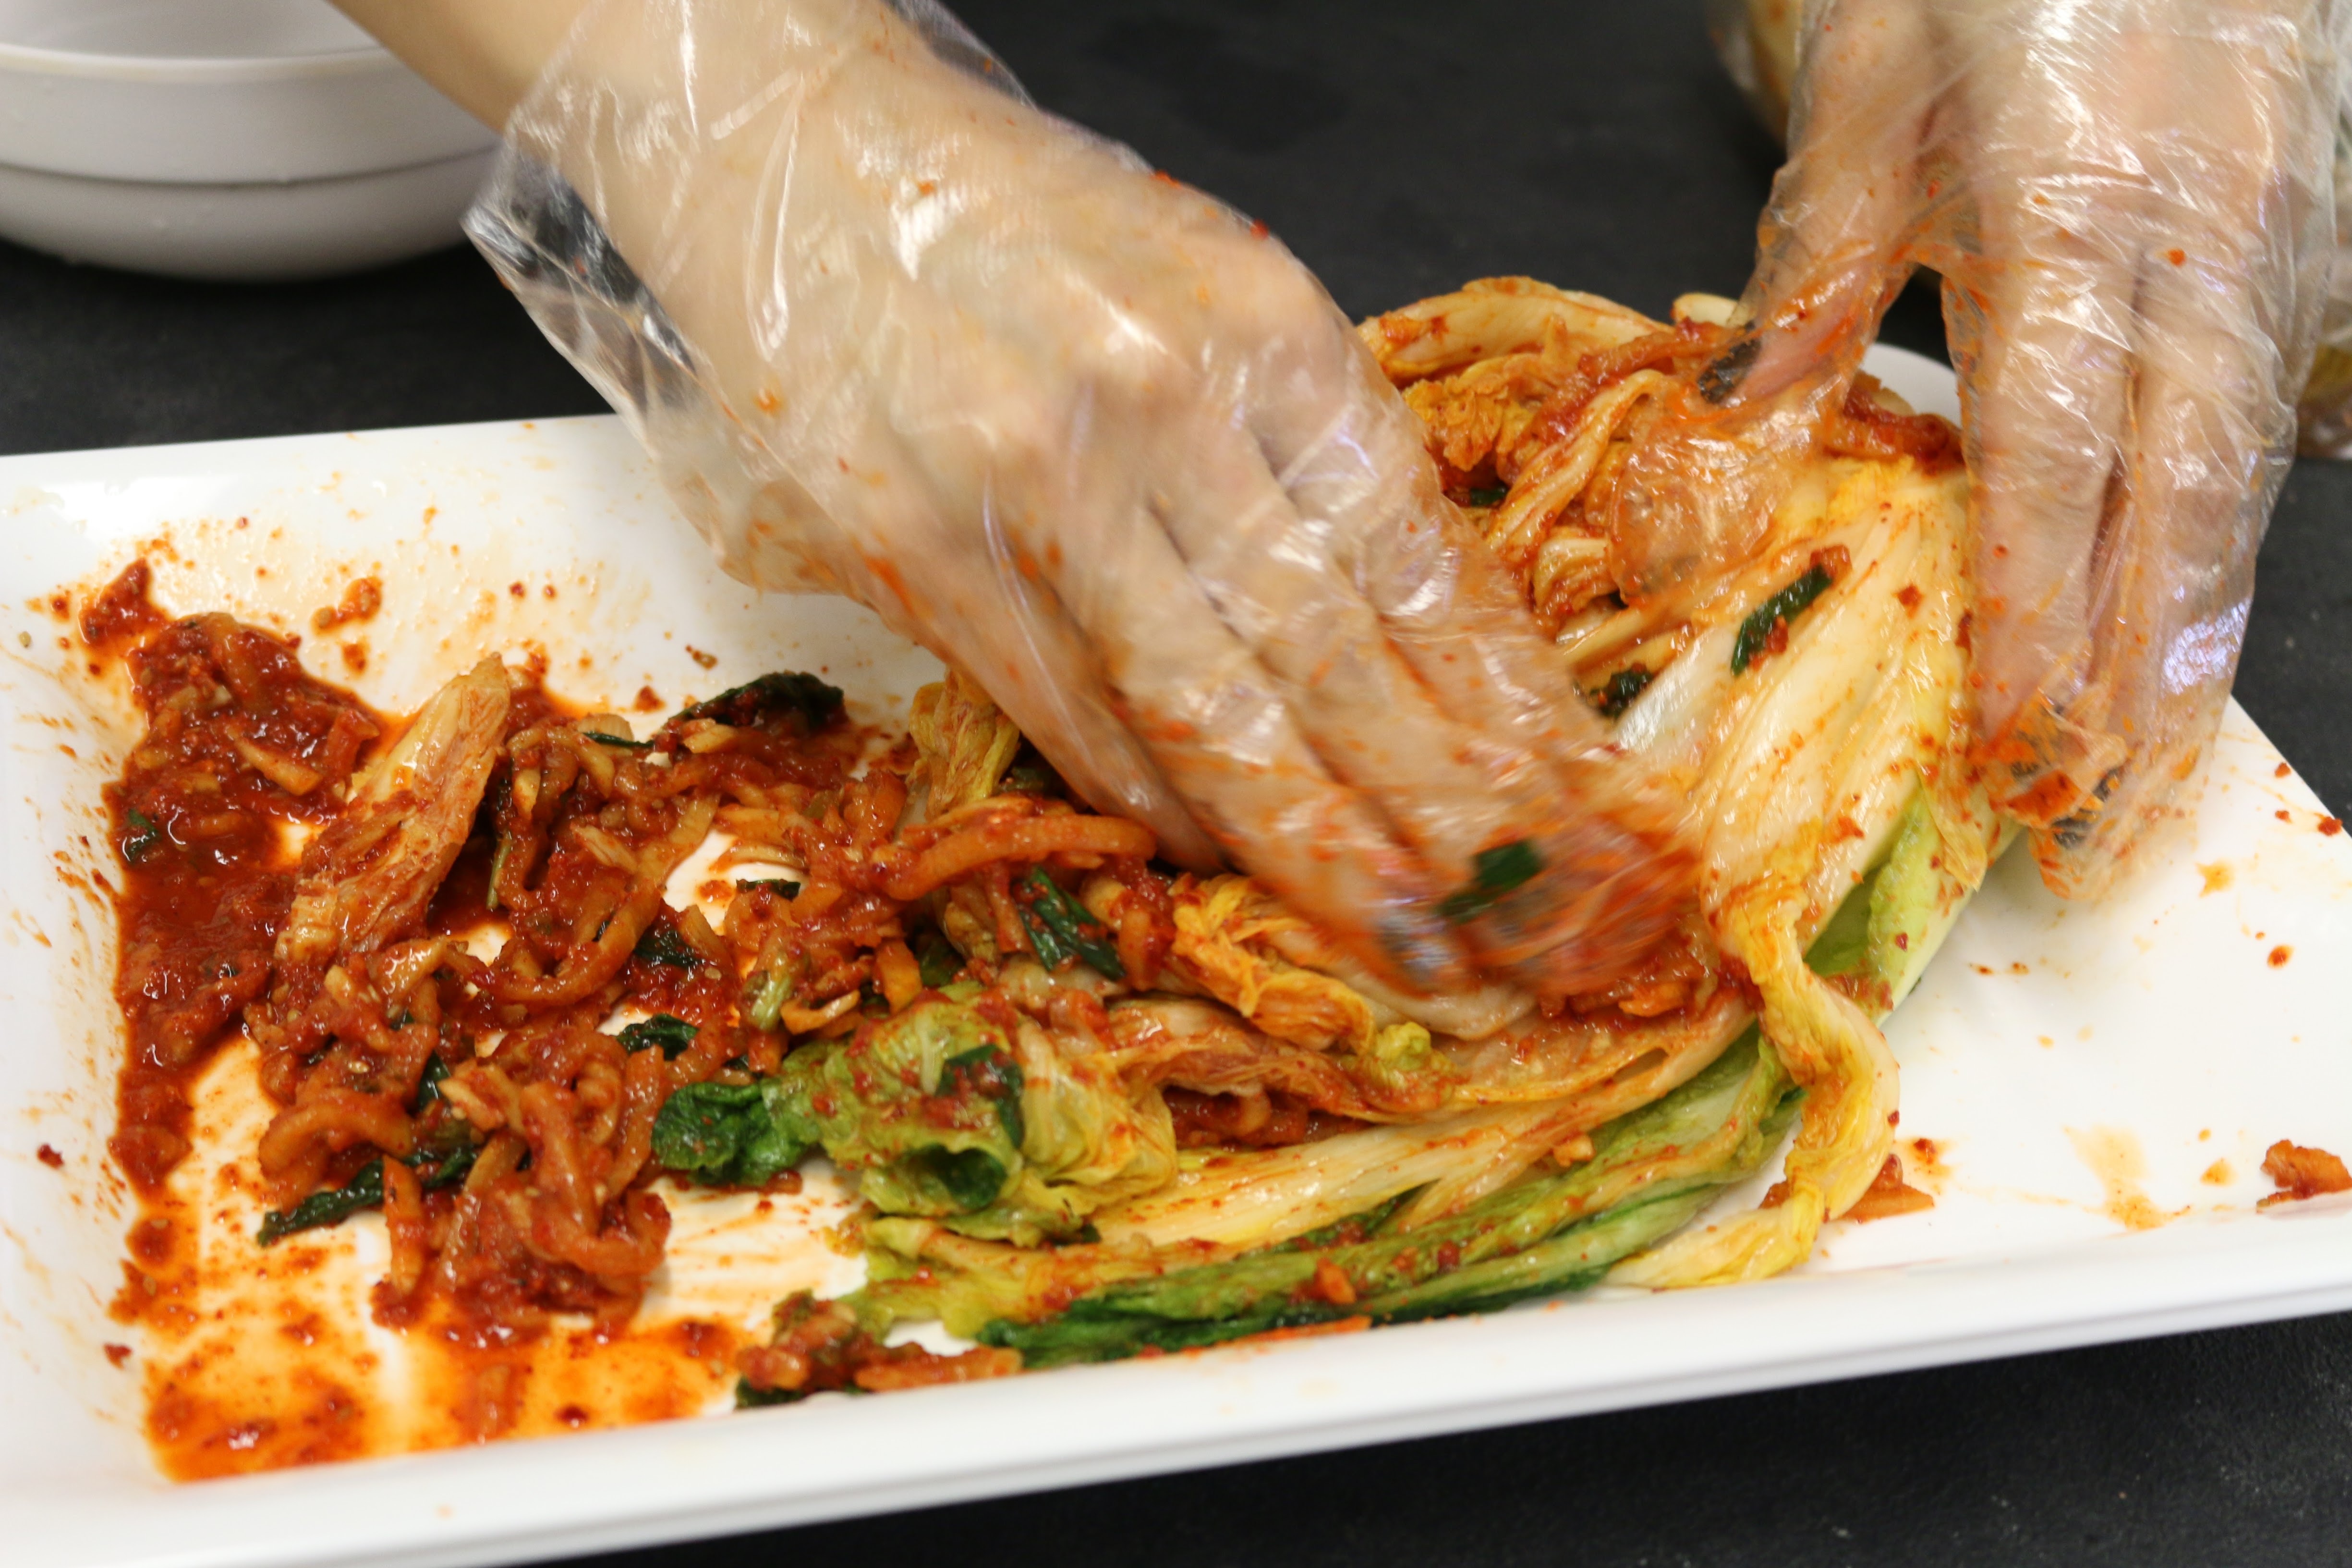 With gloves on, generously apply onto each leaf of the cabbage with the seafood paste.